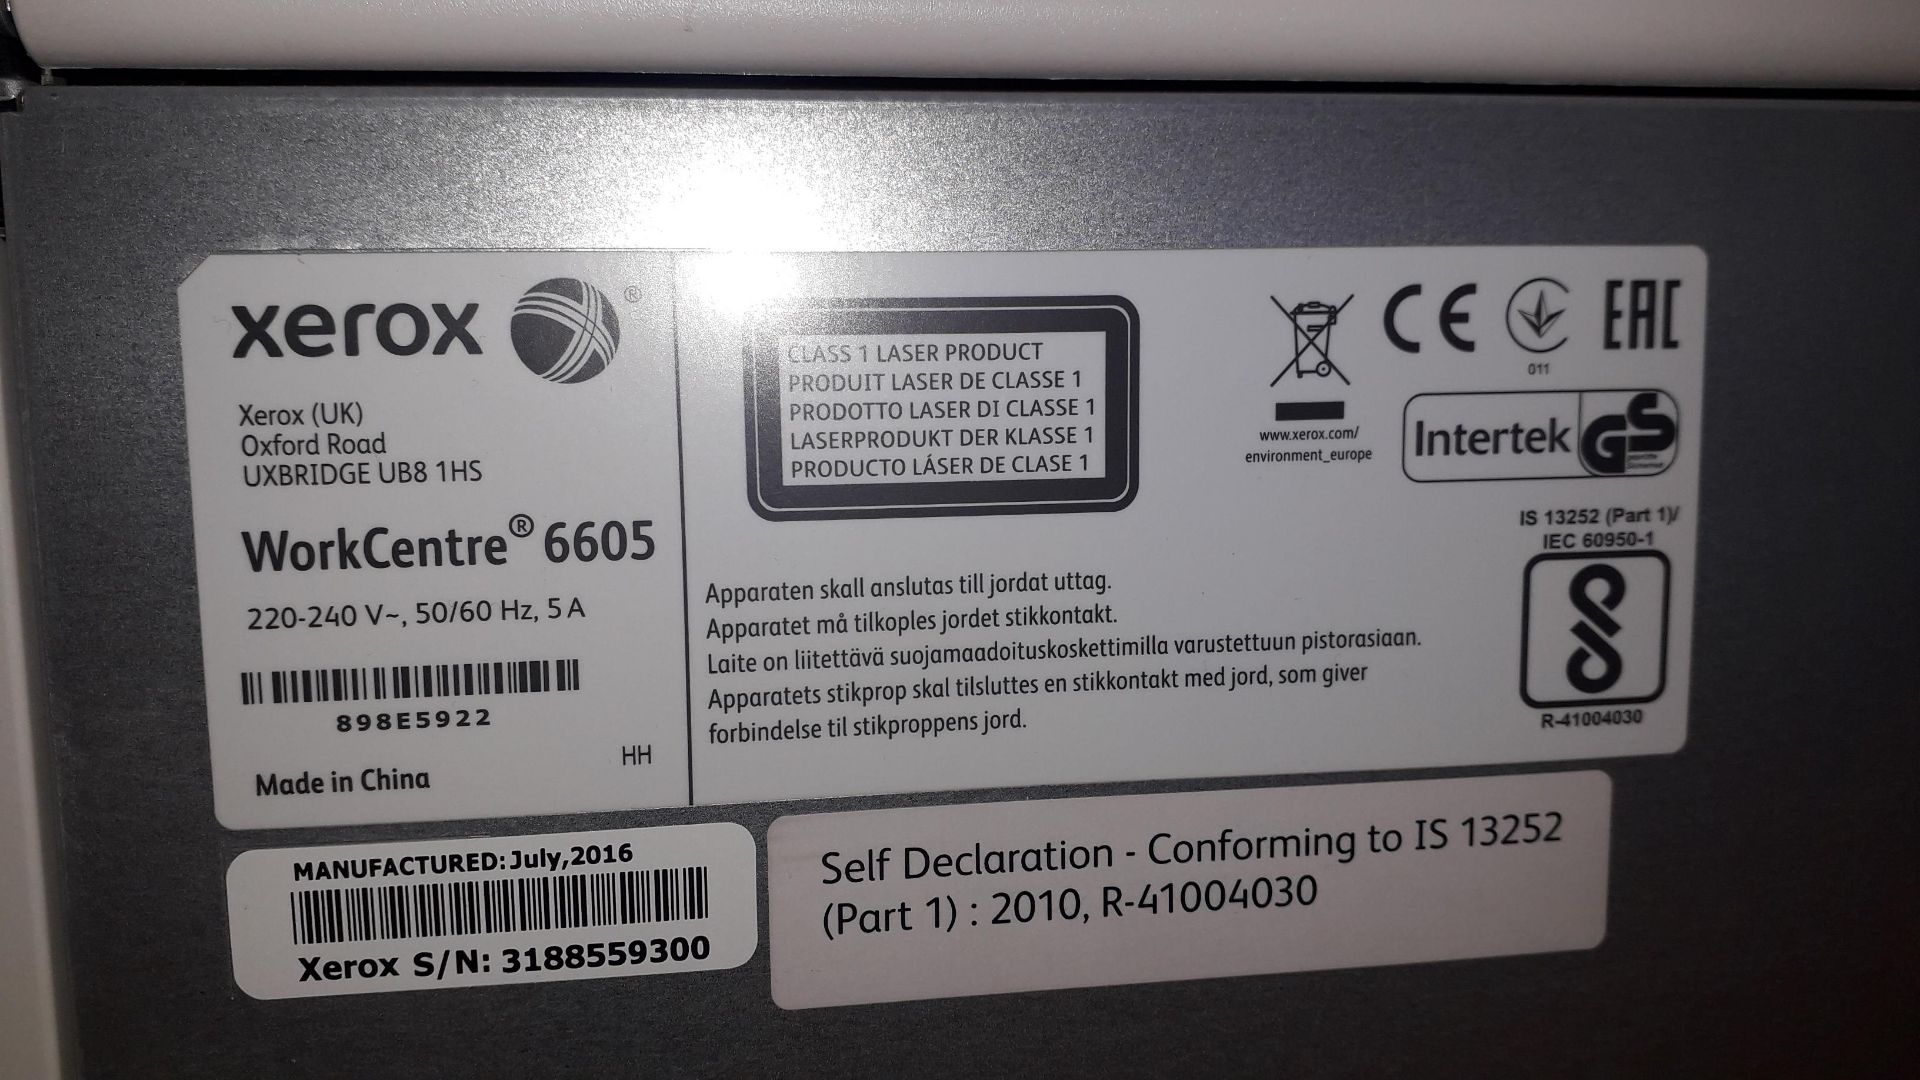 Xerox Workcentre 6605 Multifunction Printer (Jul 2016) serial number 3188559300 (Located on 1st - Image 2 of 2